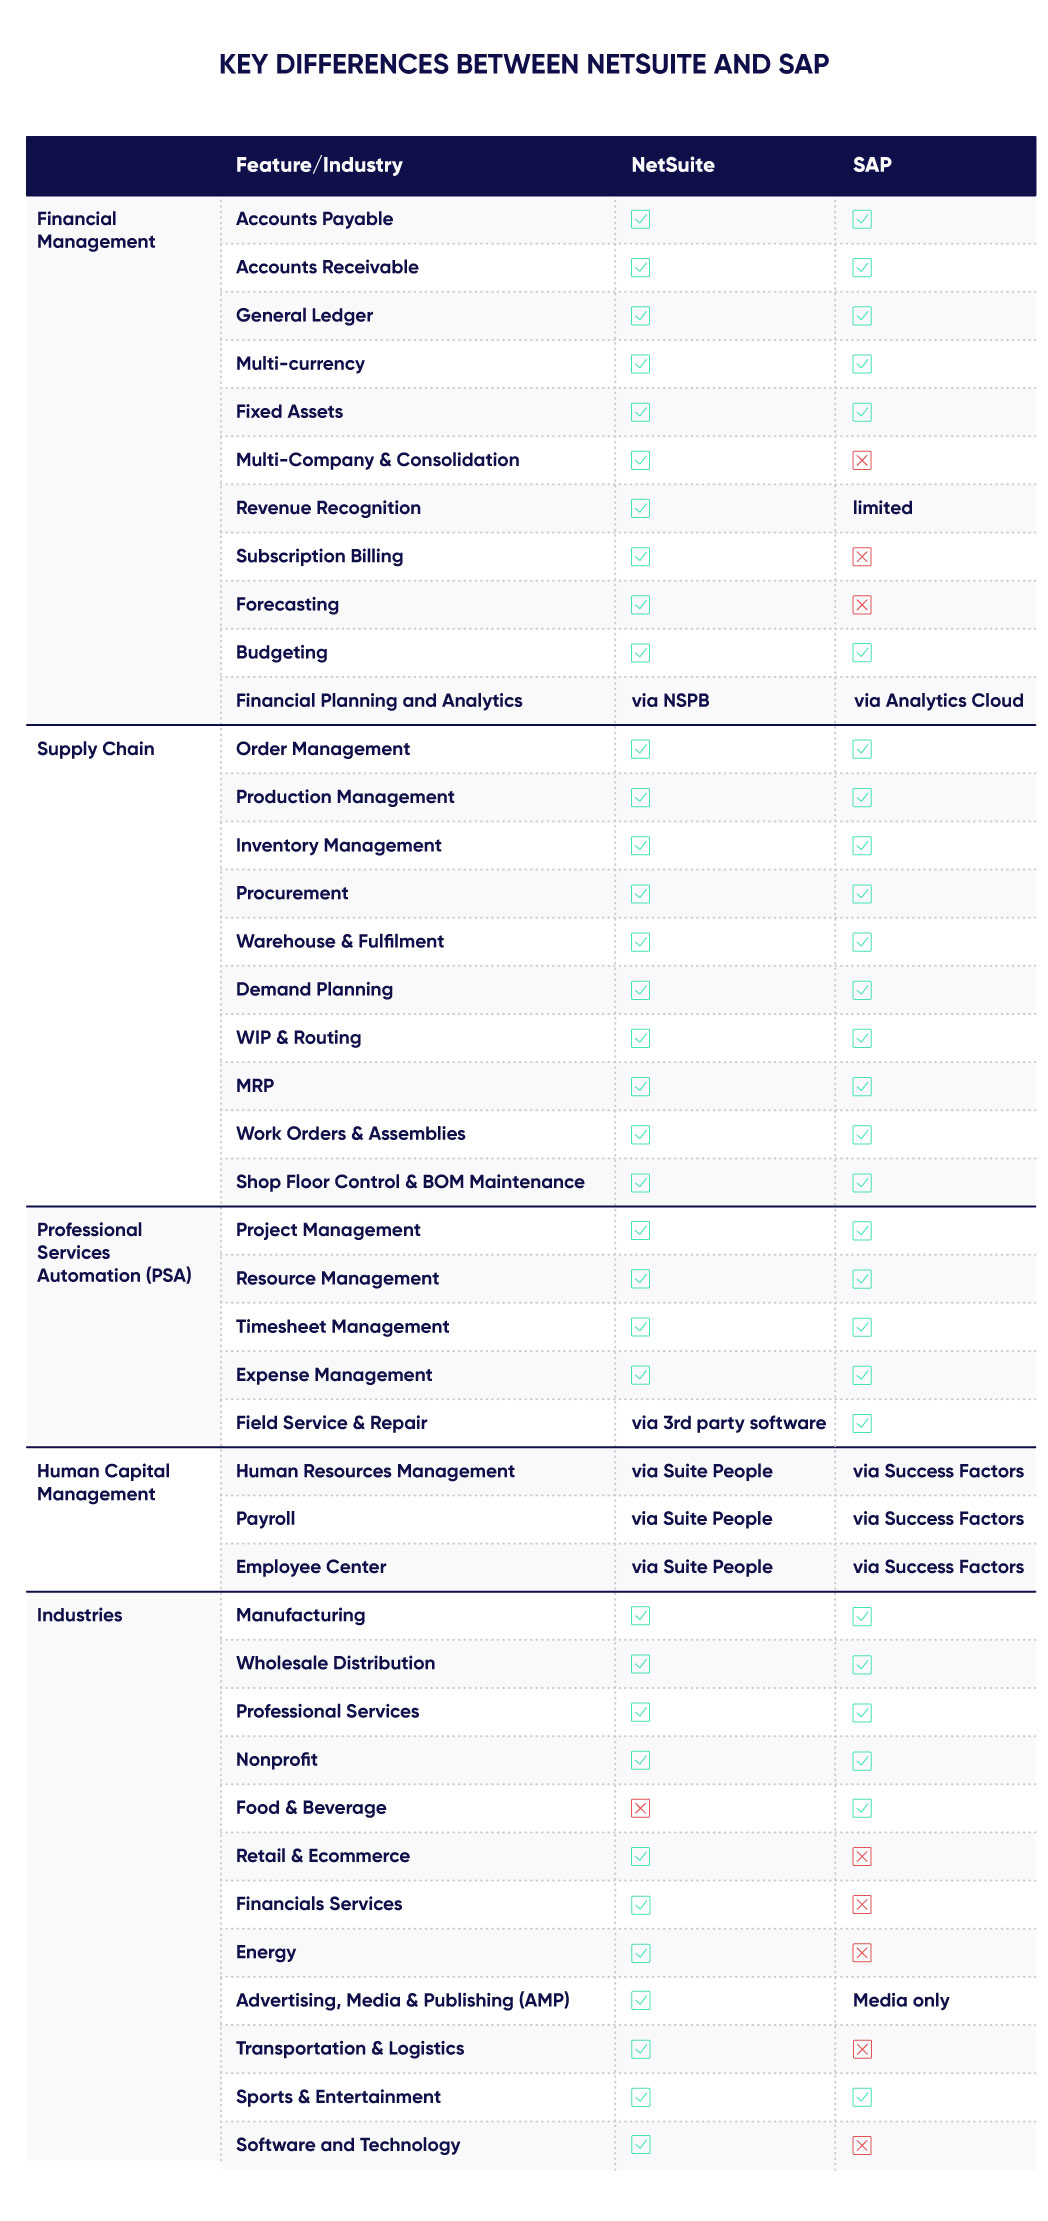 Table of differences between SAP and NetSuite